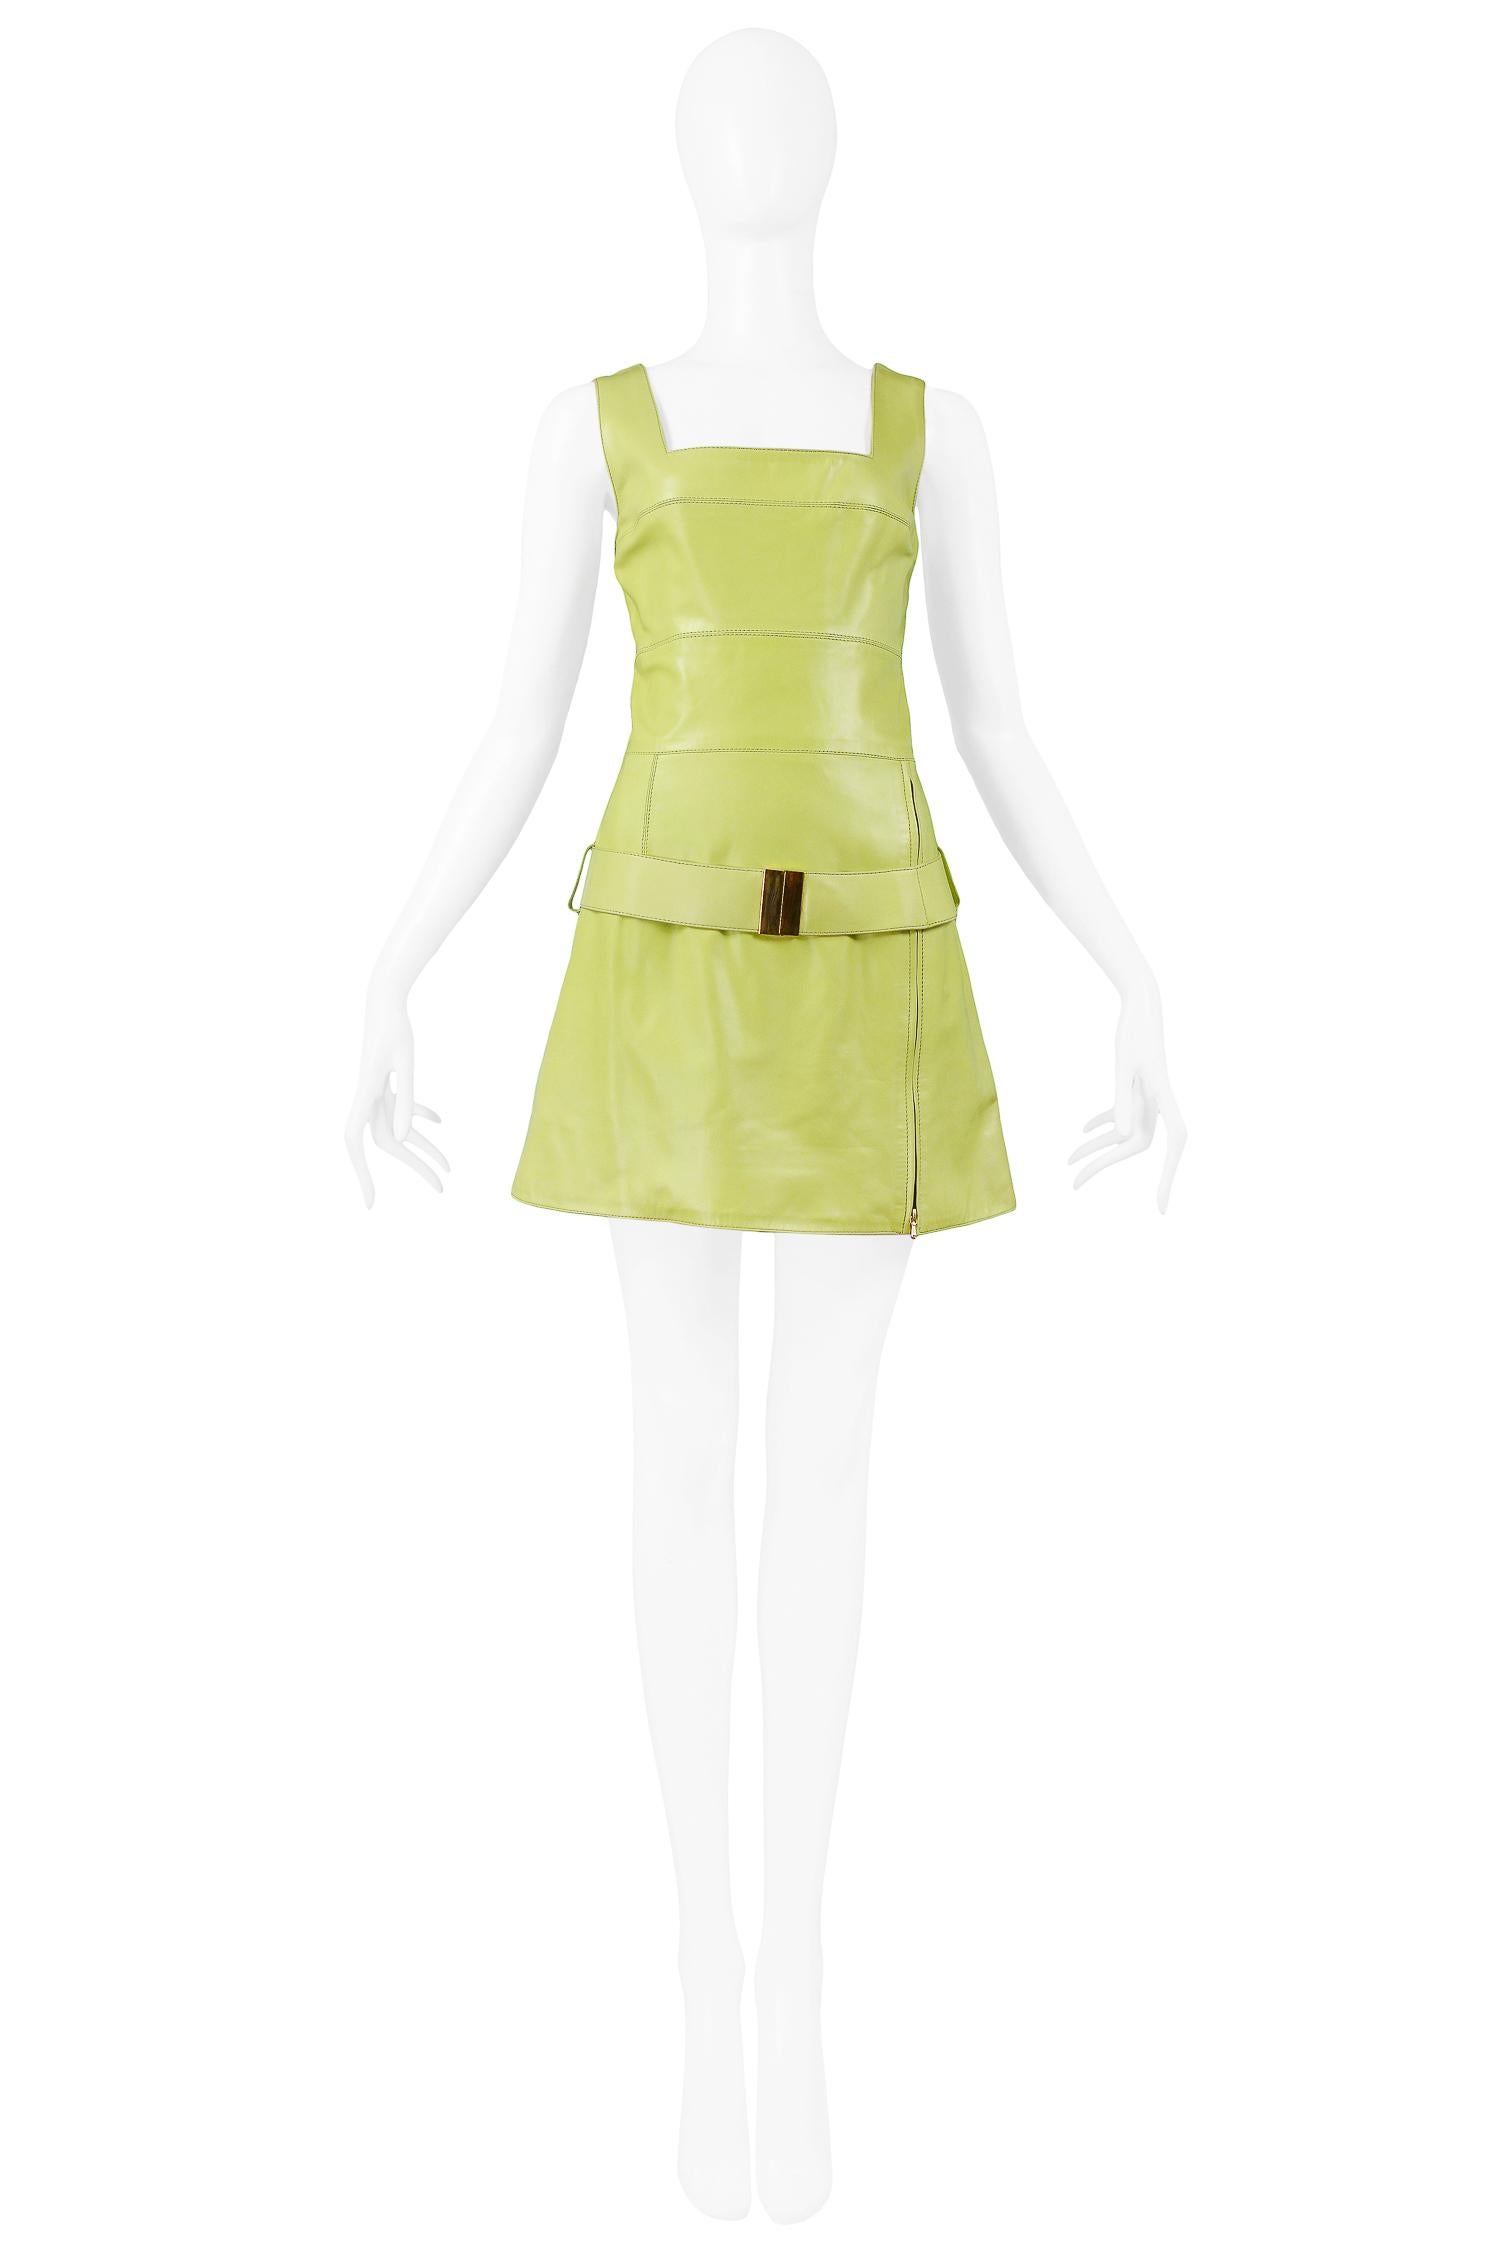 Vintage Claude Montana chartreuse green lamb leather mini dress with matching belt with gold clasp at hip, zipper slit at front, and zipper closure at center back.

Excellent Vintage Condition.

Size 40